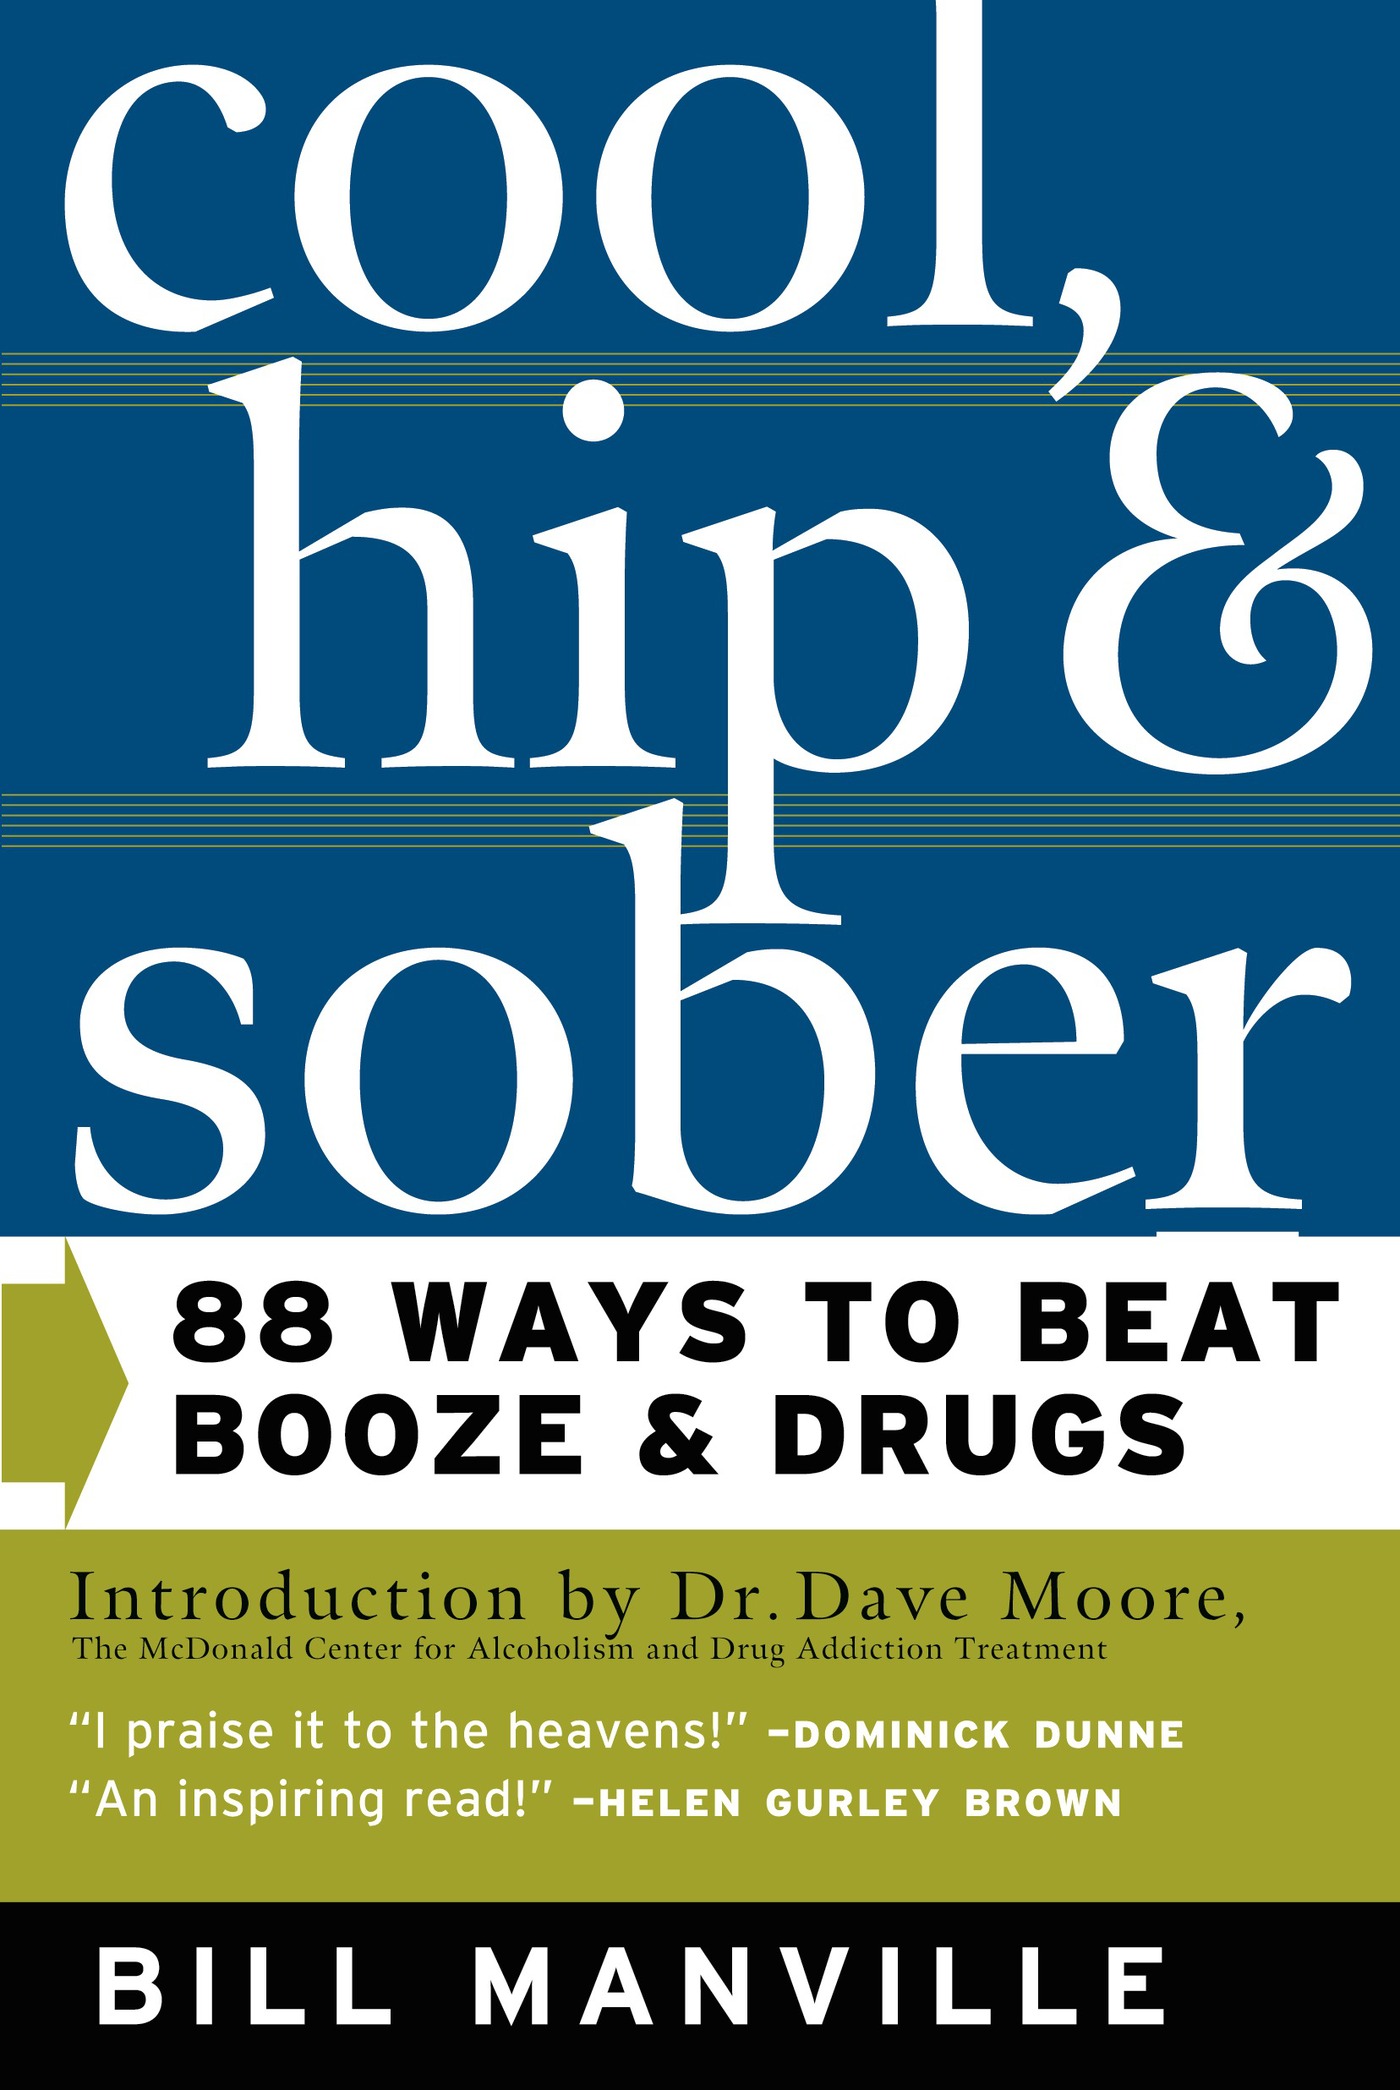 Cool, Hip & Sober : 88 Ways to Beat Booze and Drugs by Bill Manville